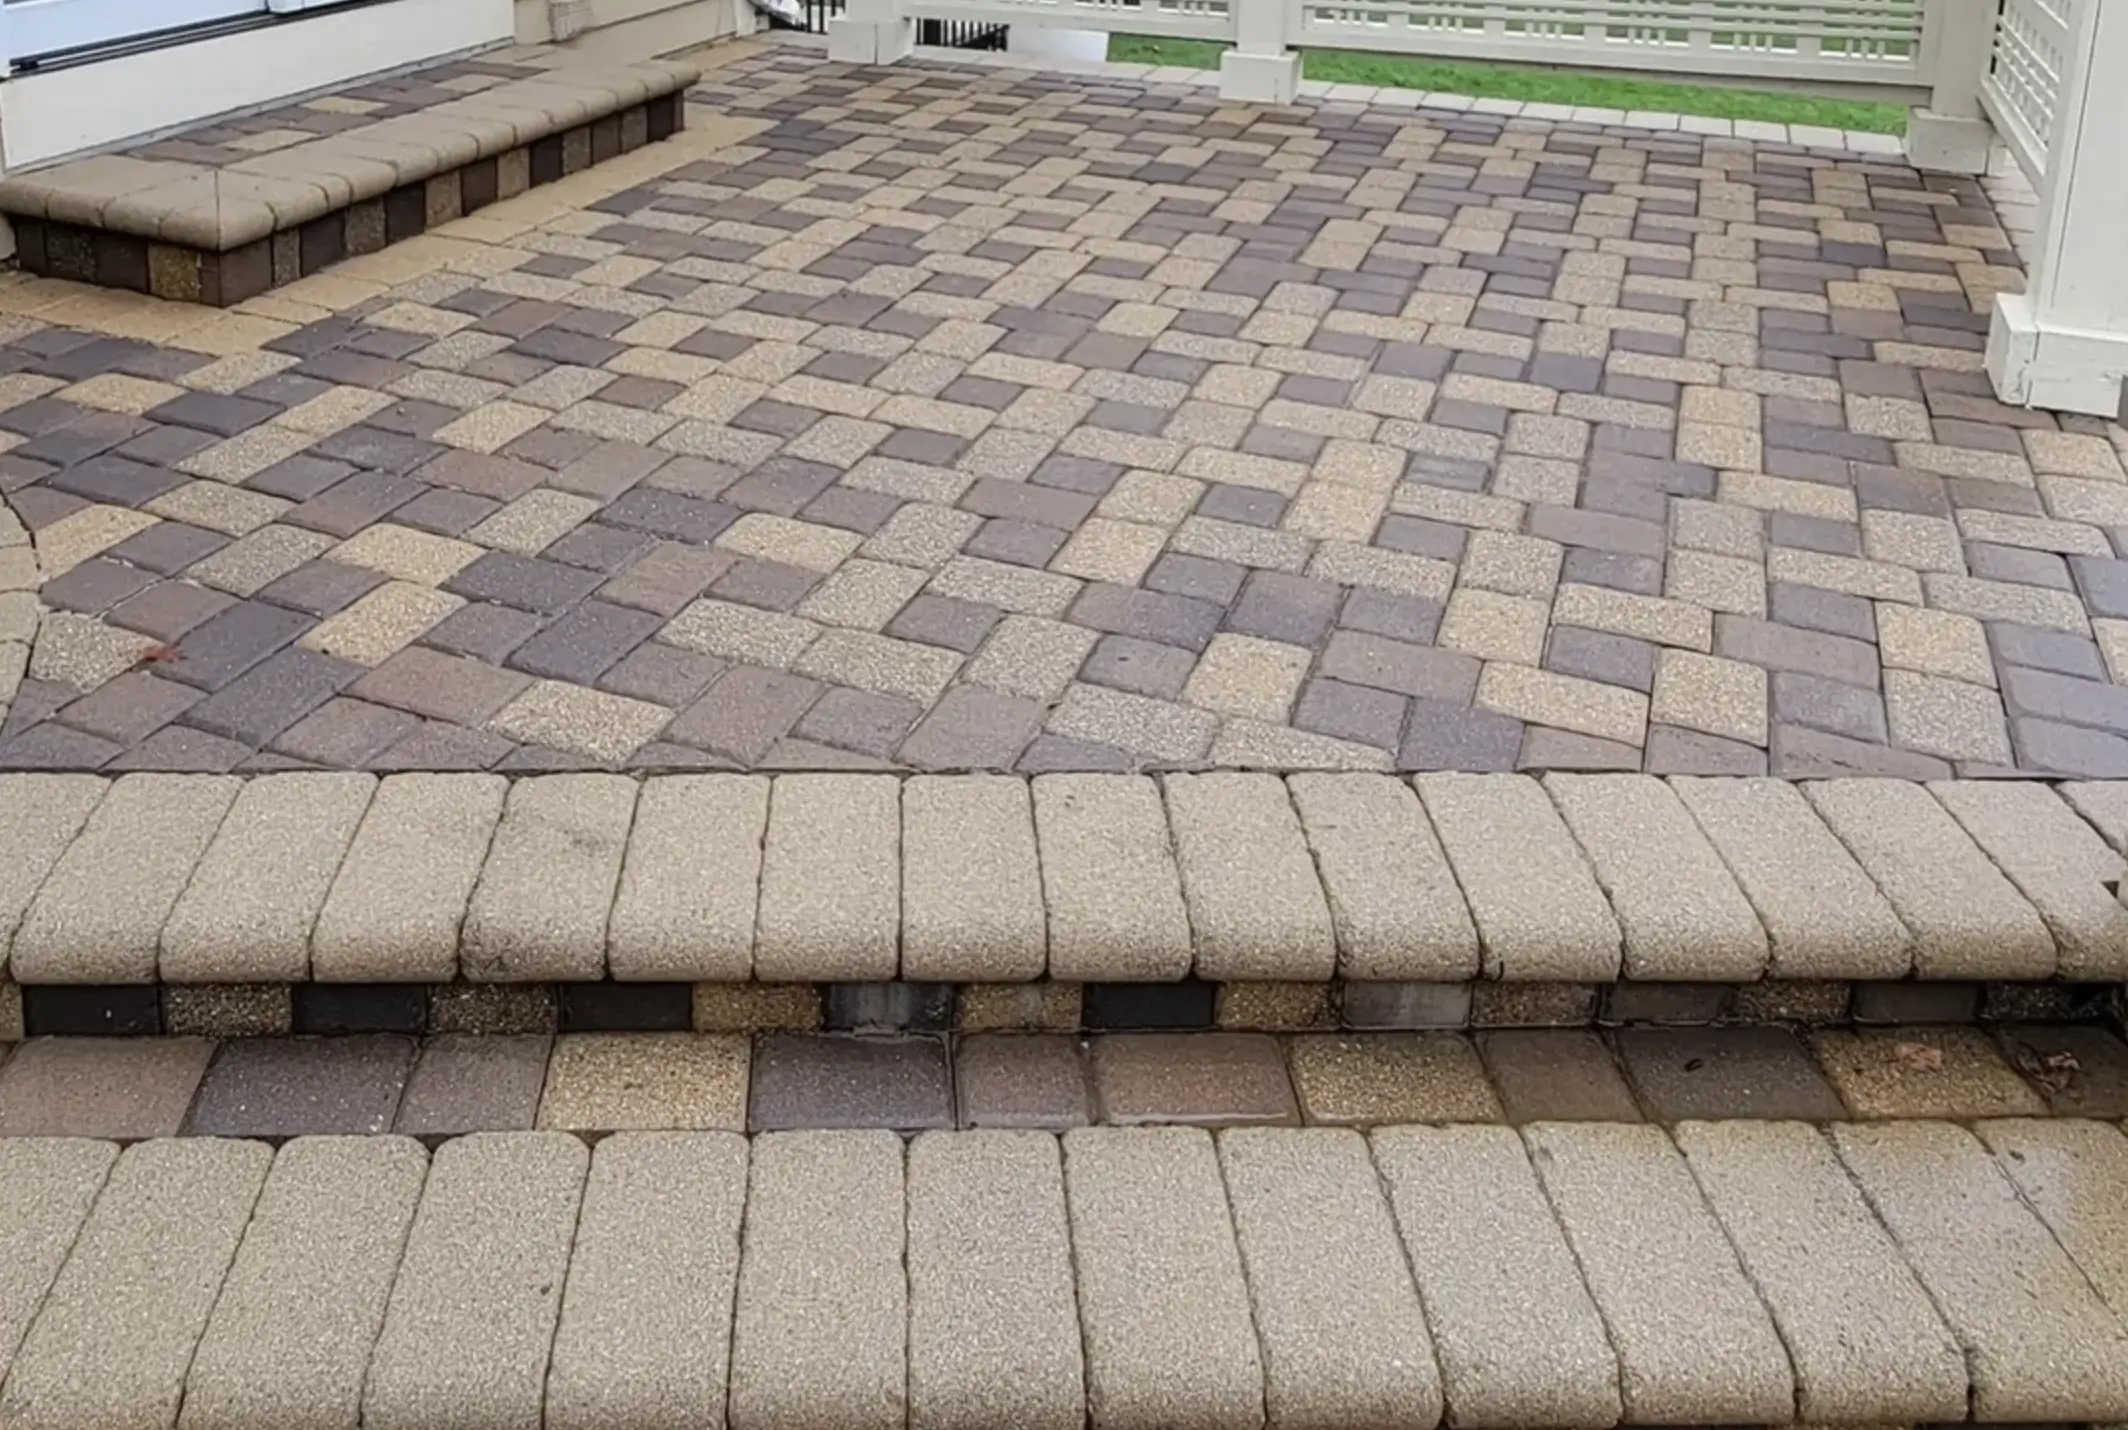 Paver pressure washing before and after